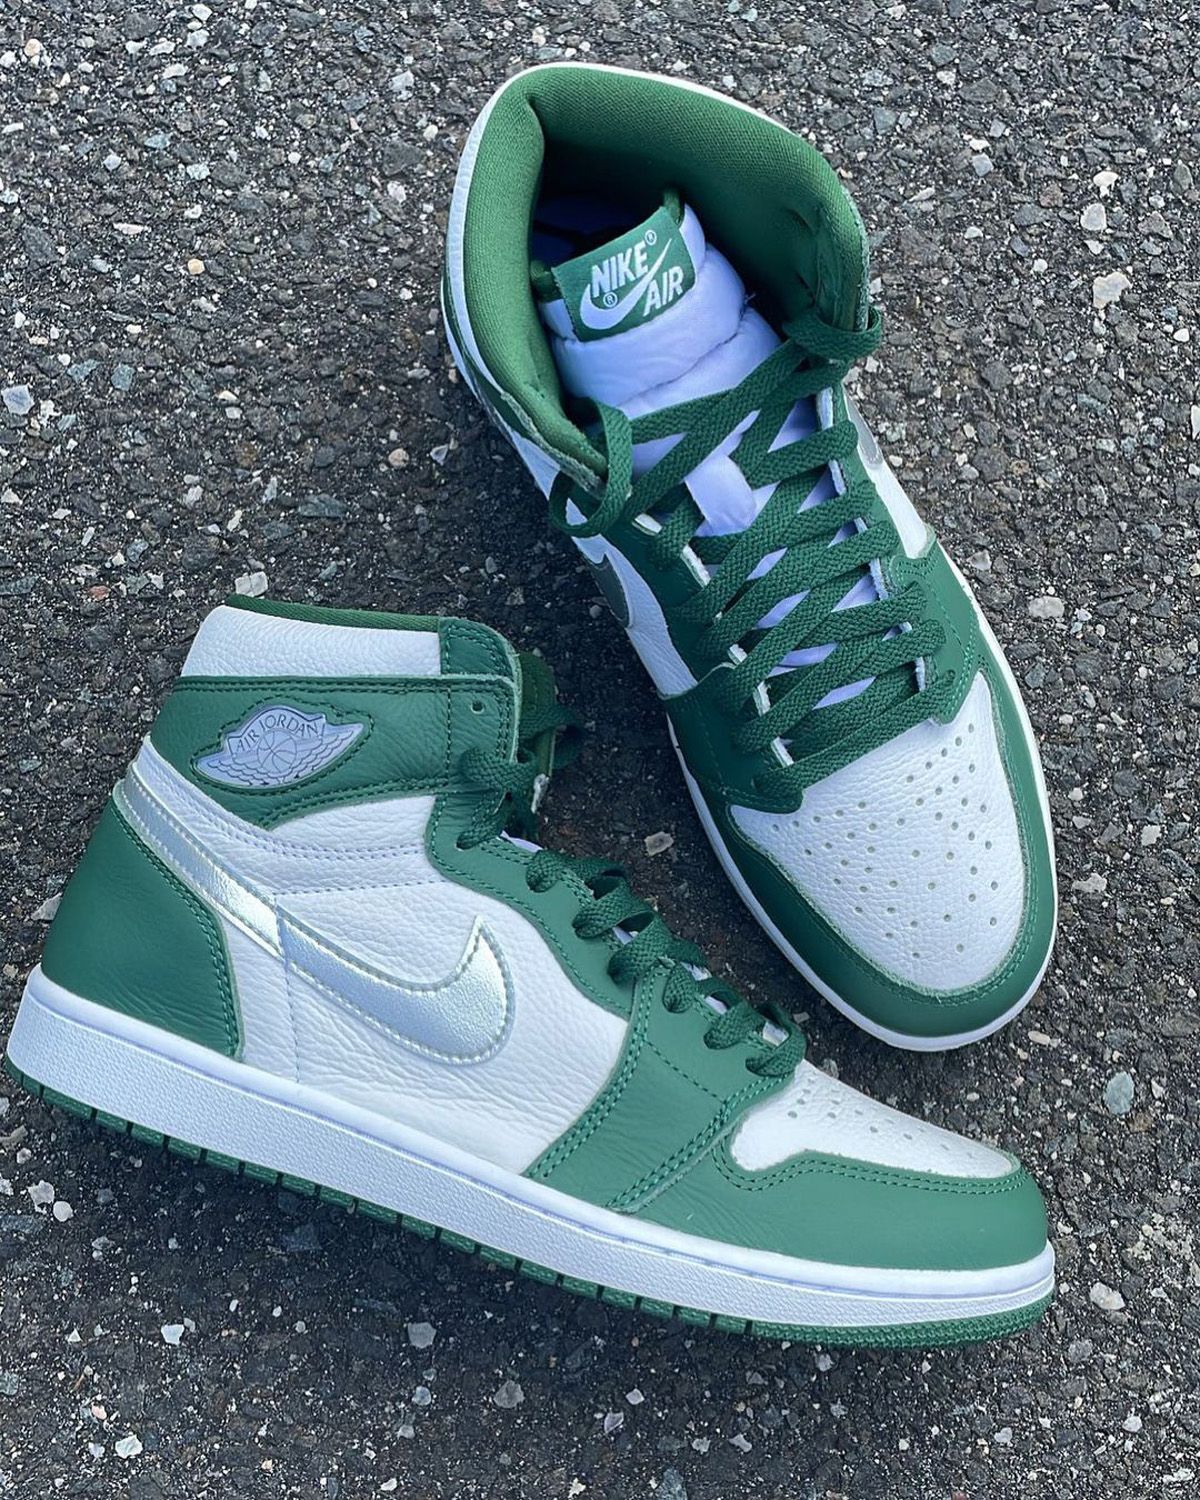 Where to Buy the Air Jordan 1 High “Gorge Green” | House of Heat°